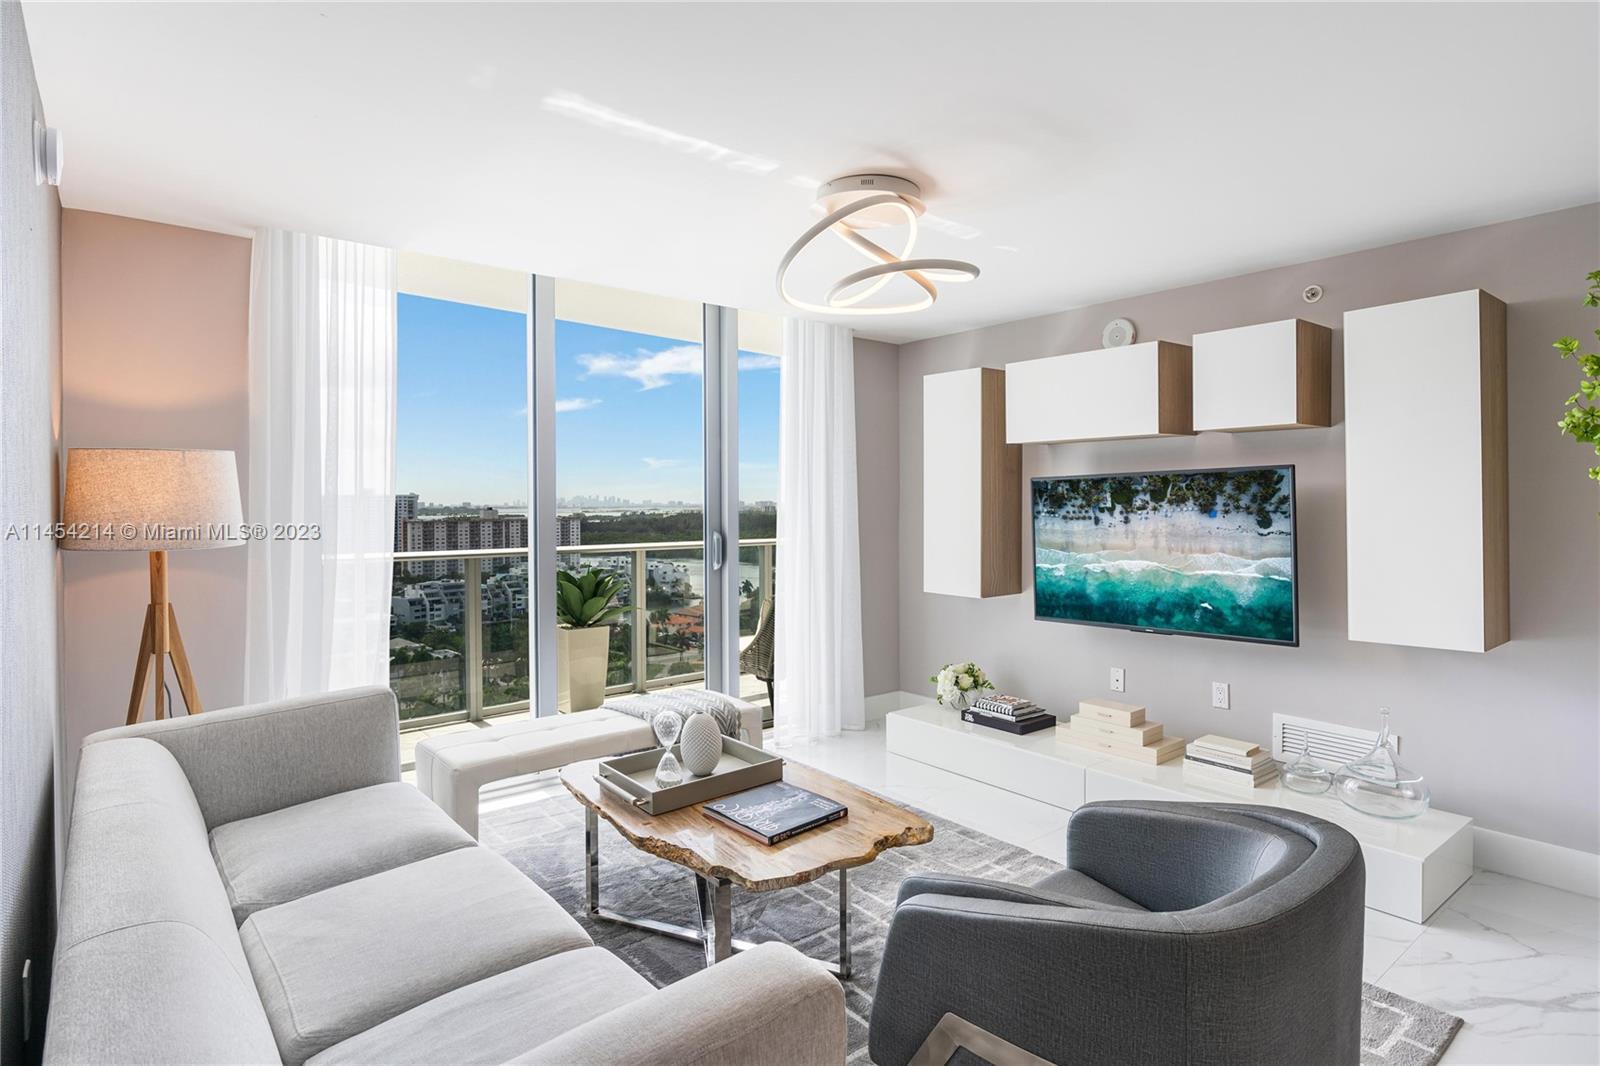 This newly built condo offers 2 bedrooms plus a den and 3 full bathrooms. Revel in the 5-star amenit